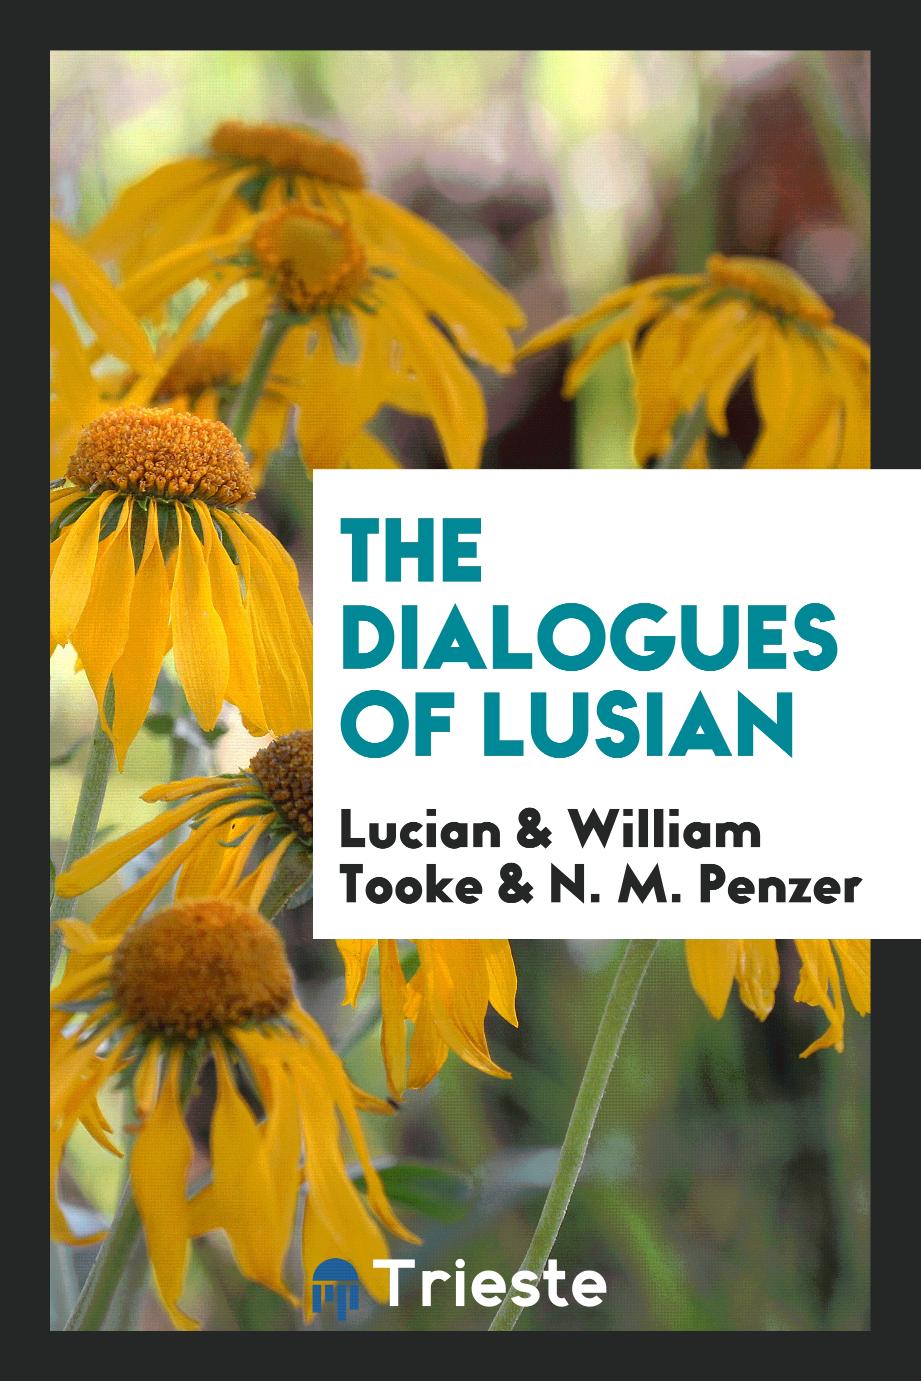 Lucian, William Tooke, N. M. Penzer - The Dialogues of Lusian